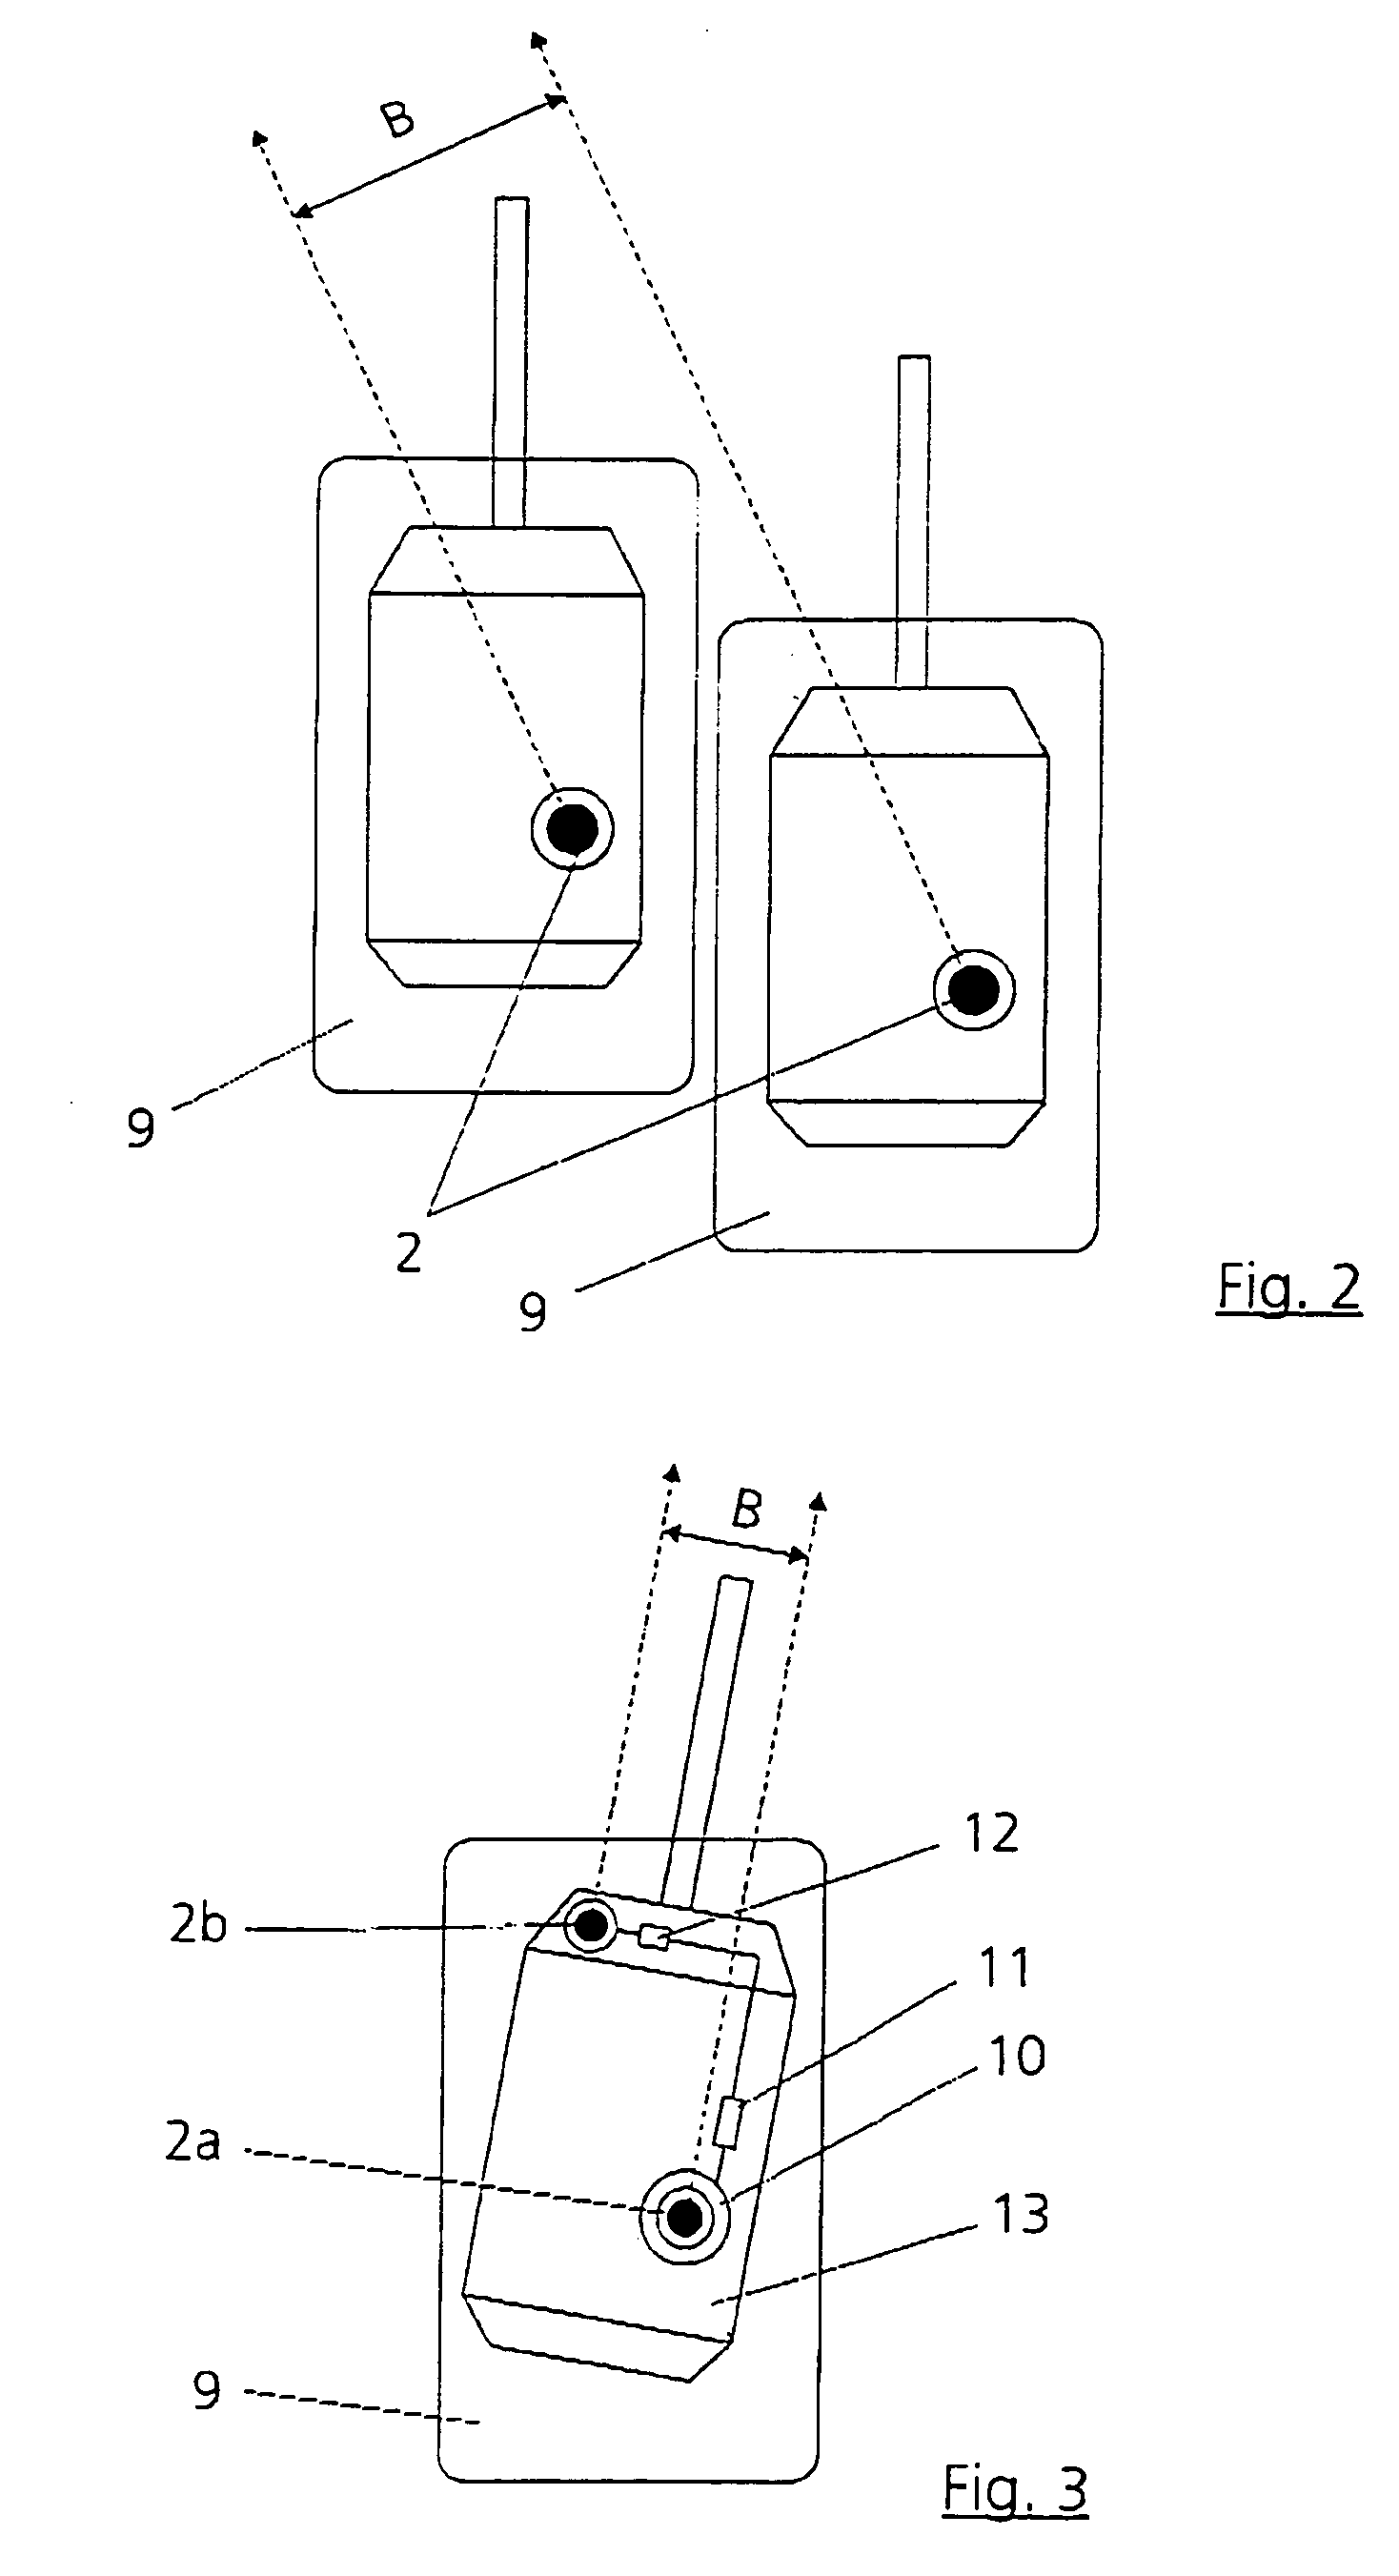 System and method for generating three-dimensional image displays